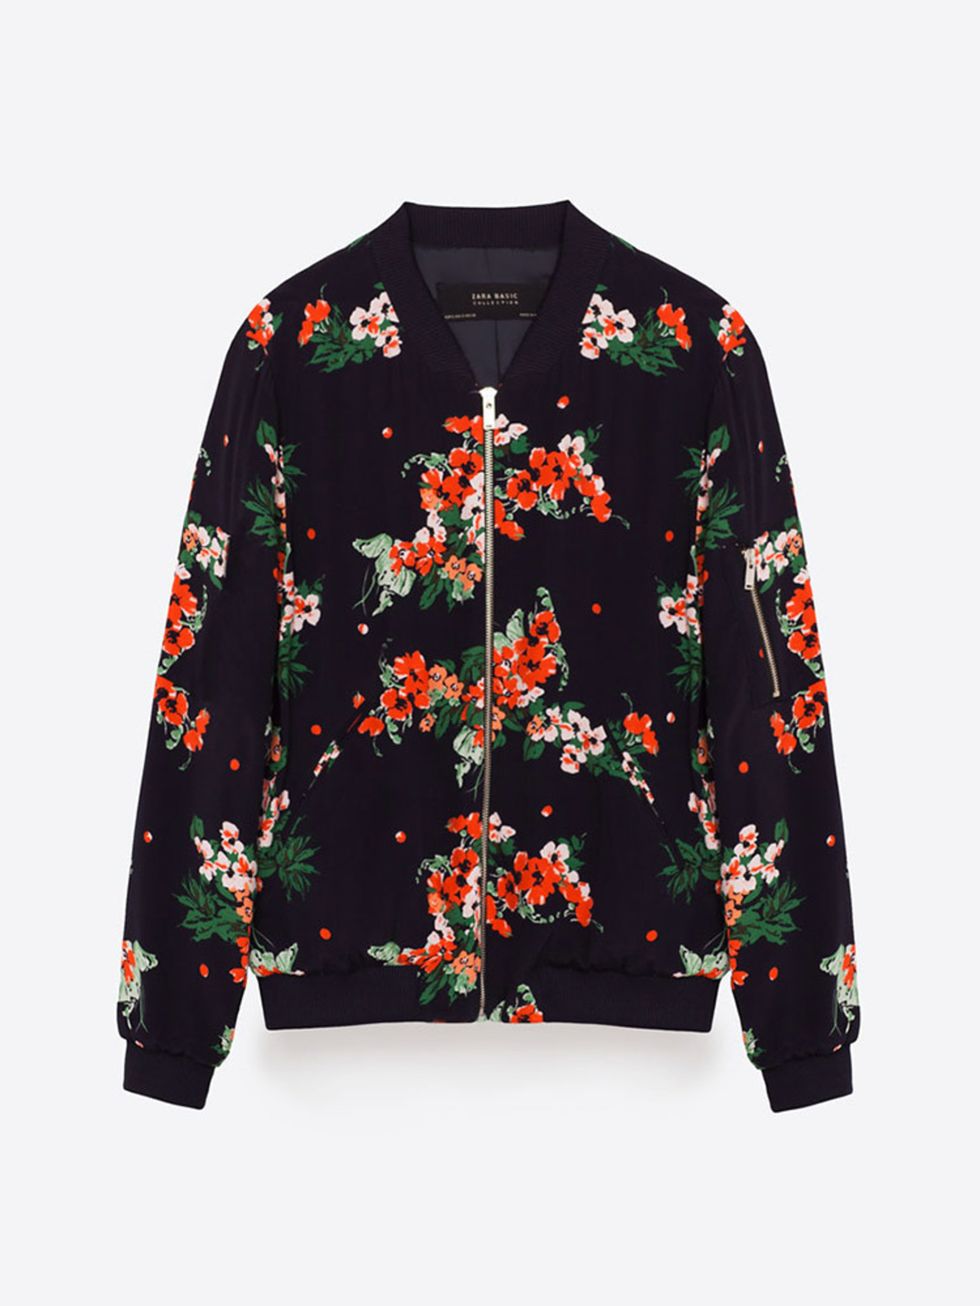 <p>Bomber jacket, £29.99, <a href="http://www.zara.com/uk/en/new-in/woman/collection/printed-bomber-jacket-c811529p3579008.html" target="_blank">Zara</a><br />
 </p>